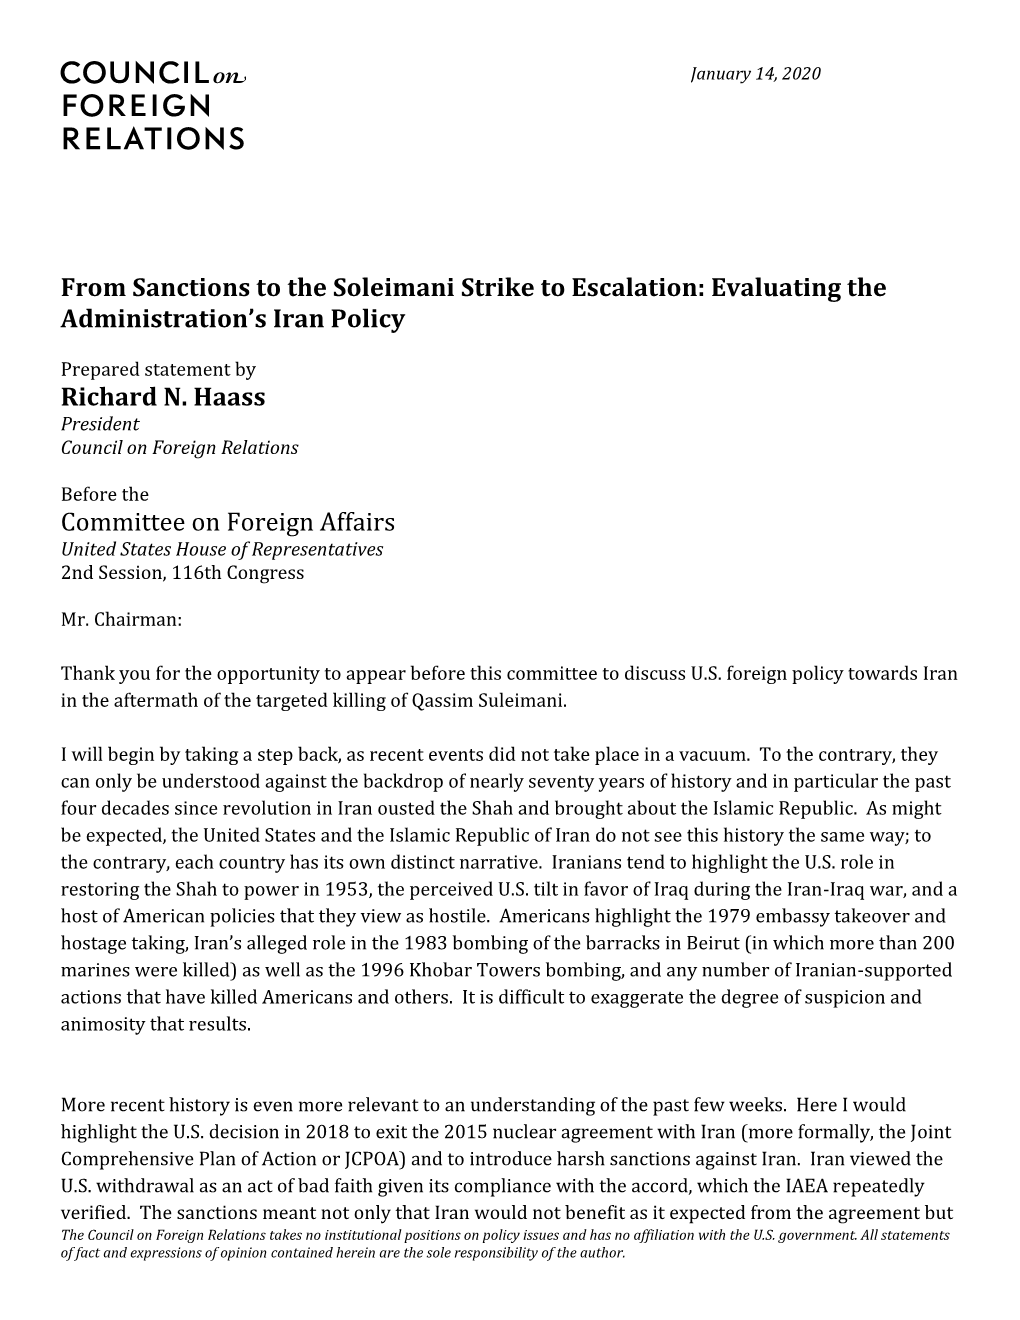 Evaluating the Administration's Iran Policy Richard N. Haass Committee O